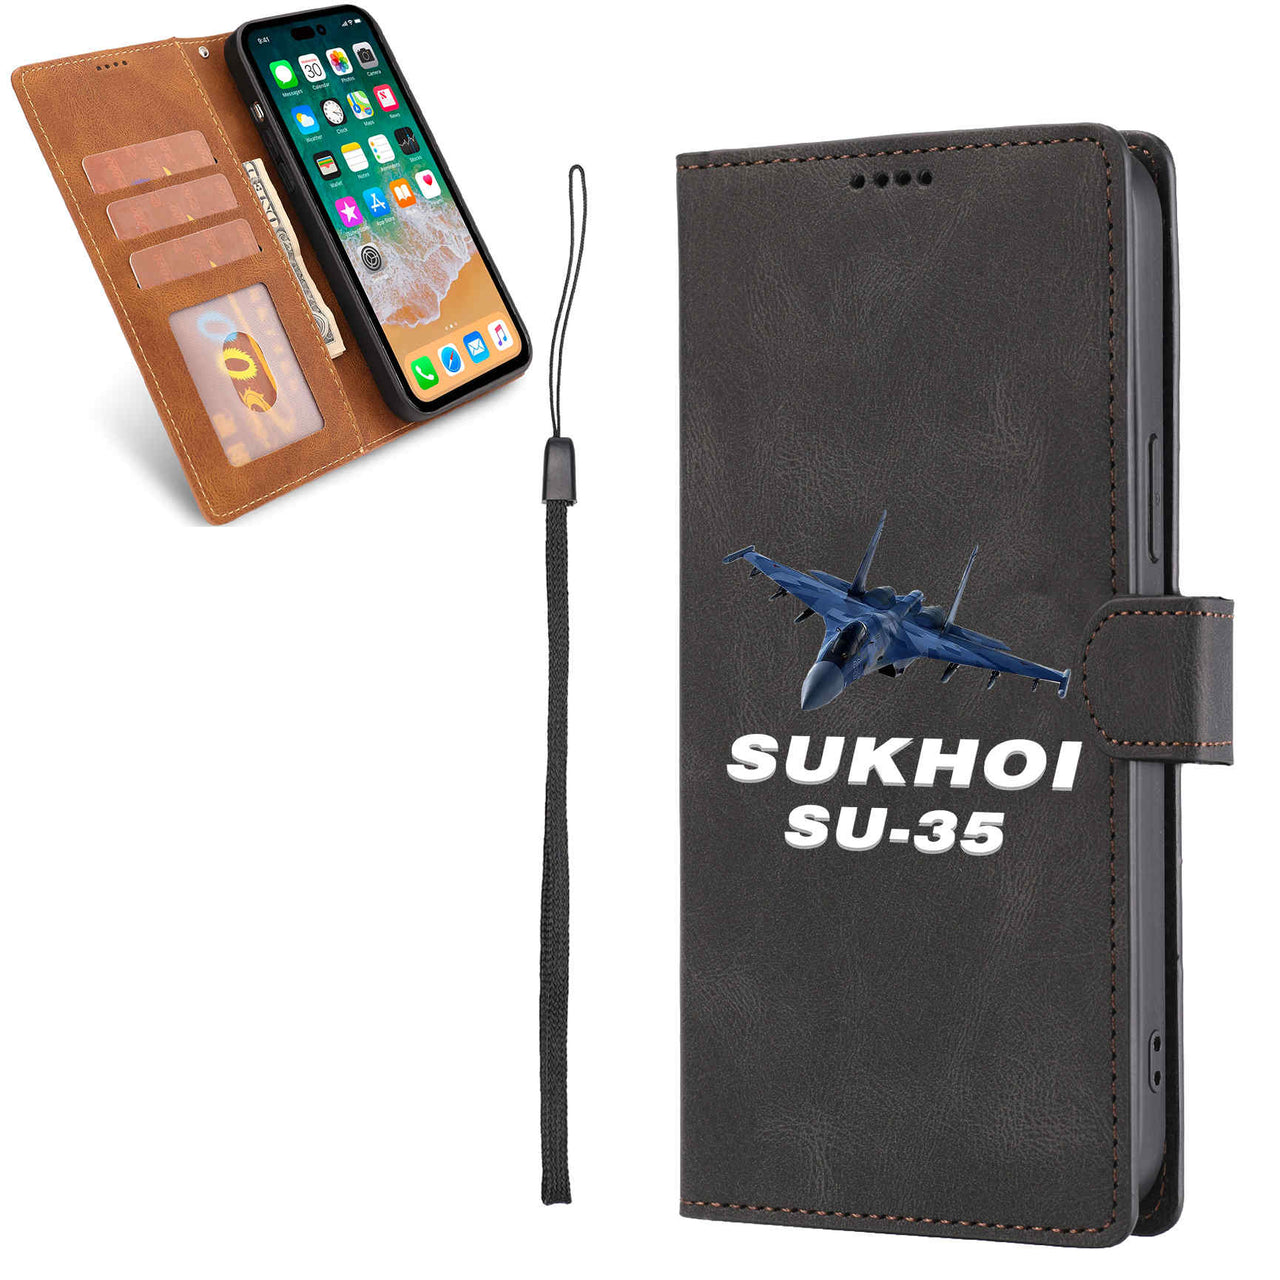 The Sukhoi SU-35 Designed Leather Samsung S & Note Cases